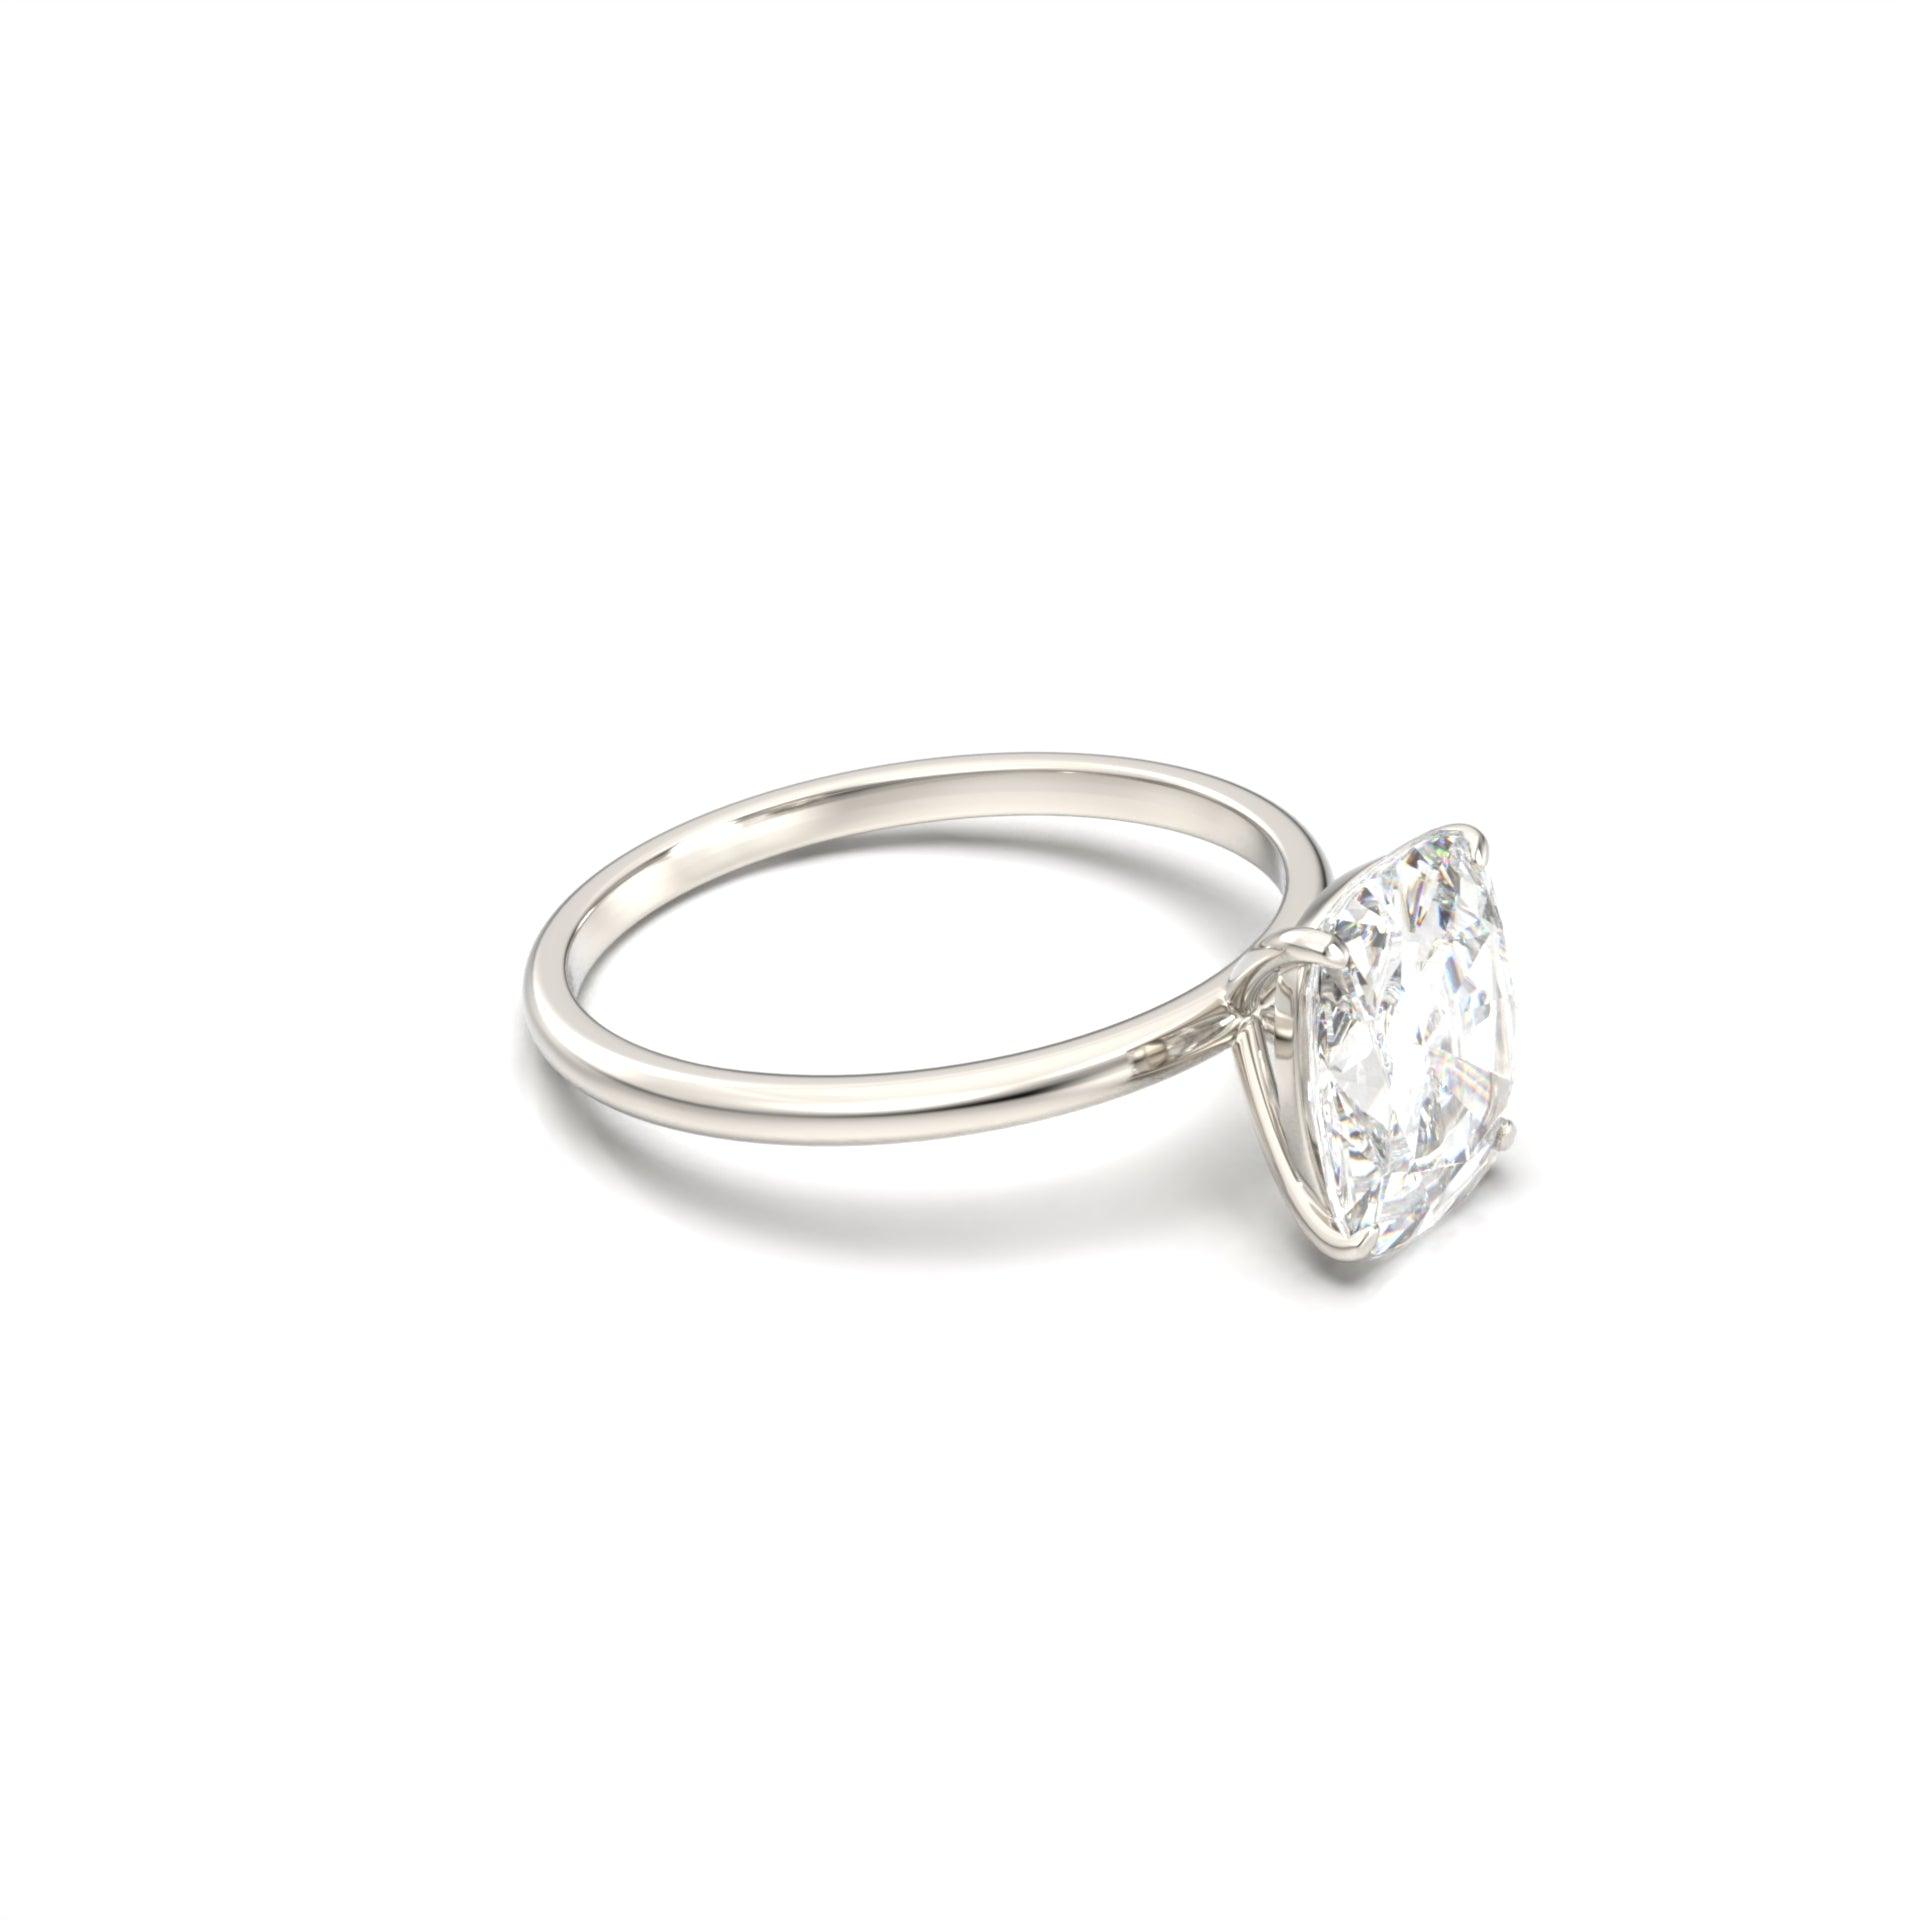 Cushion Cut 4 Claw Solitaire Ring - moissaniteengagementrings